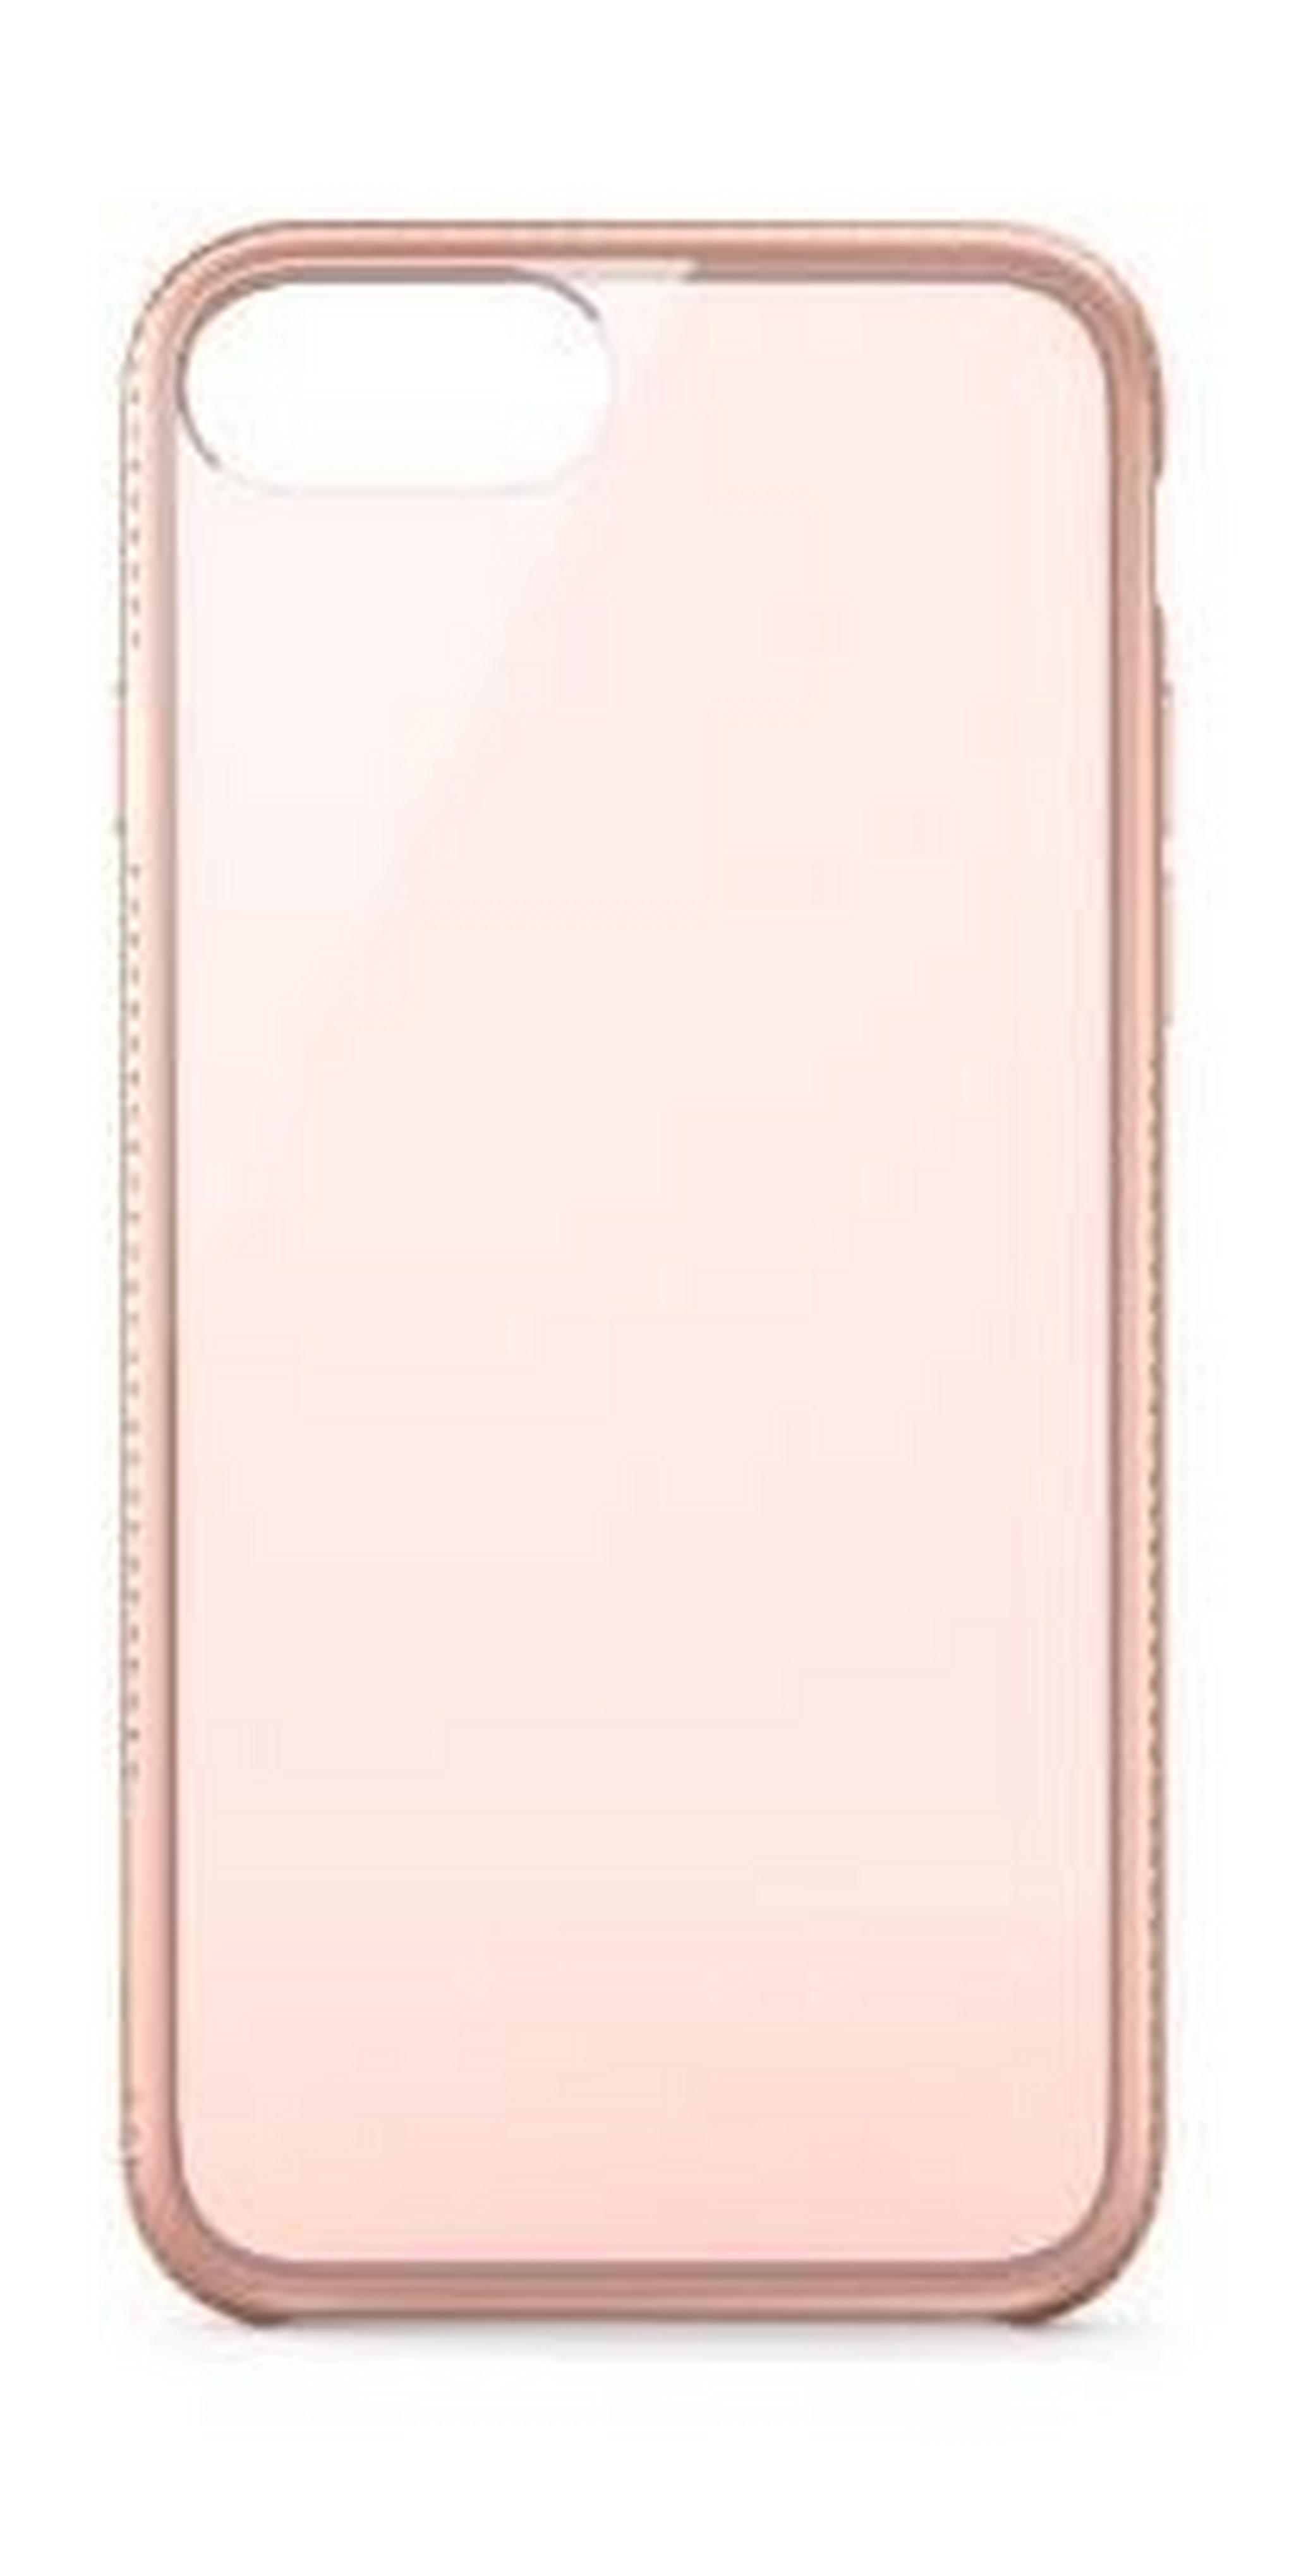 Belkin Air Protect SheerForce Case For iPhone 7 Plus (F8W809btC03) - Rose Gold